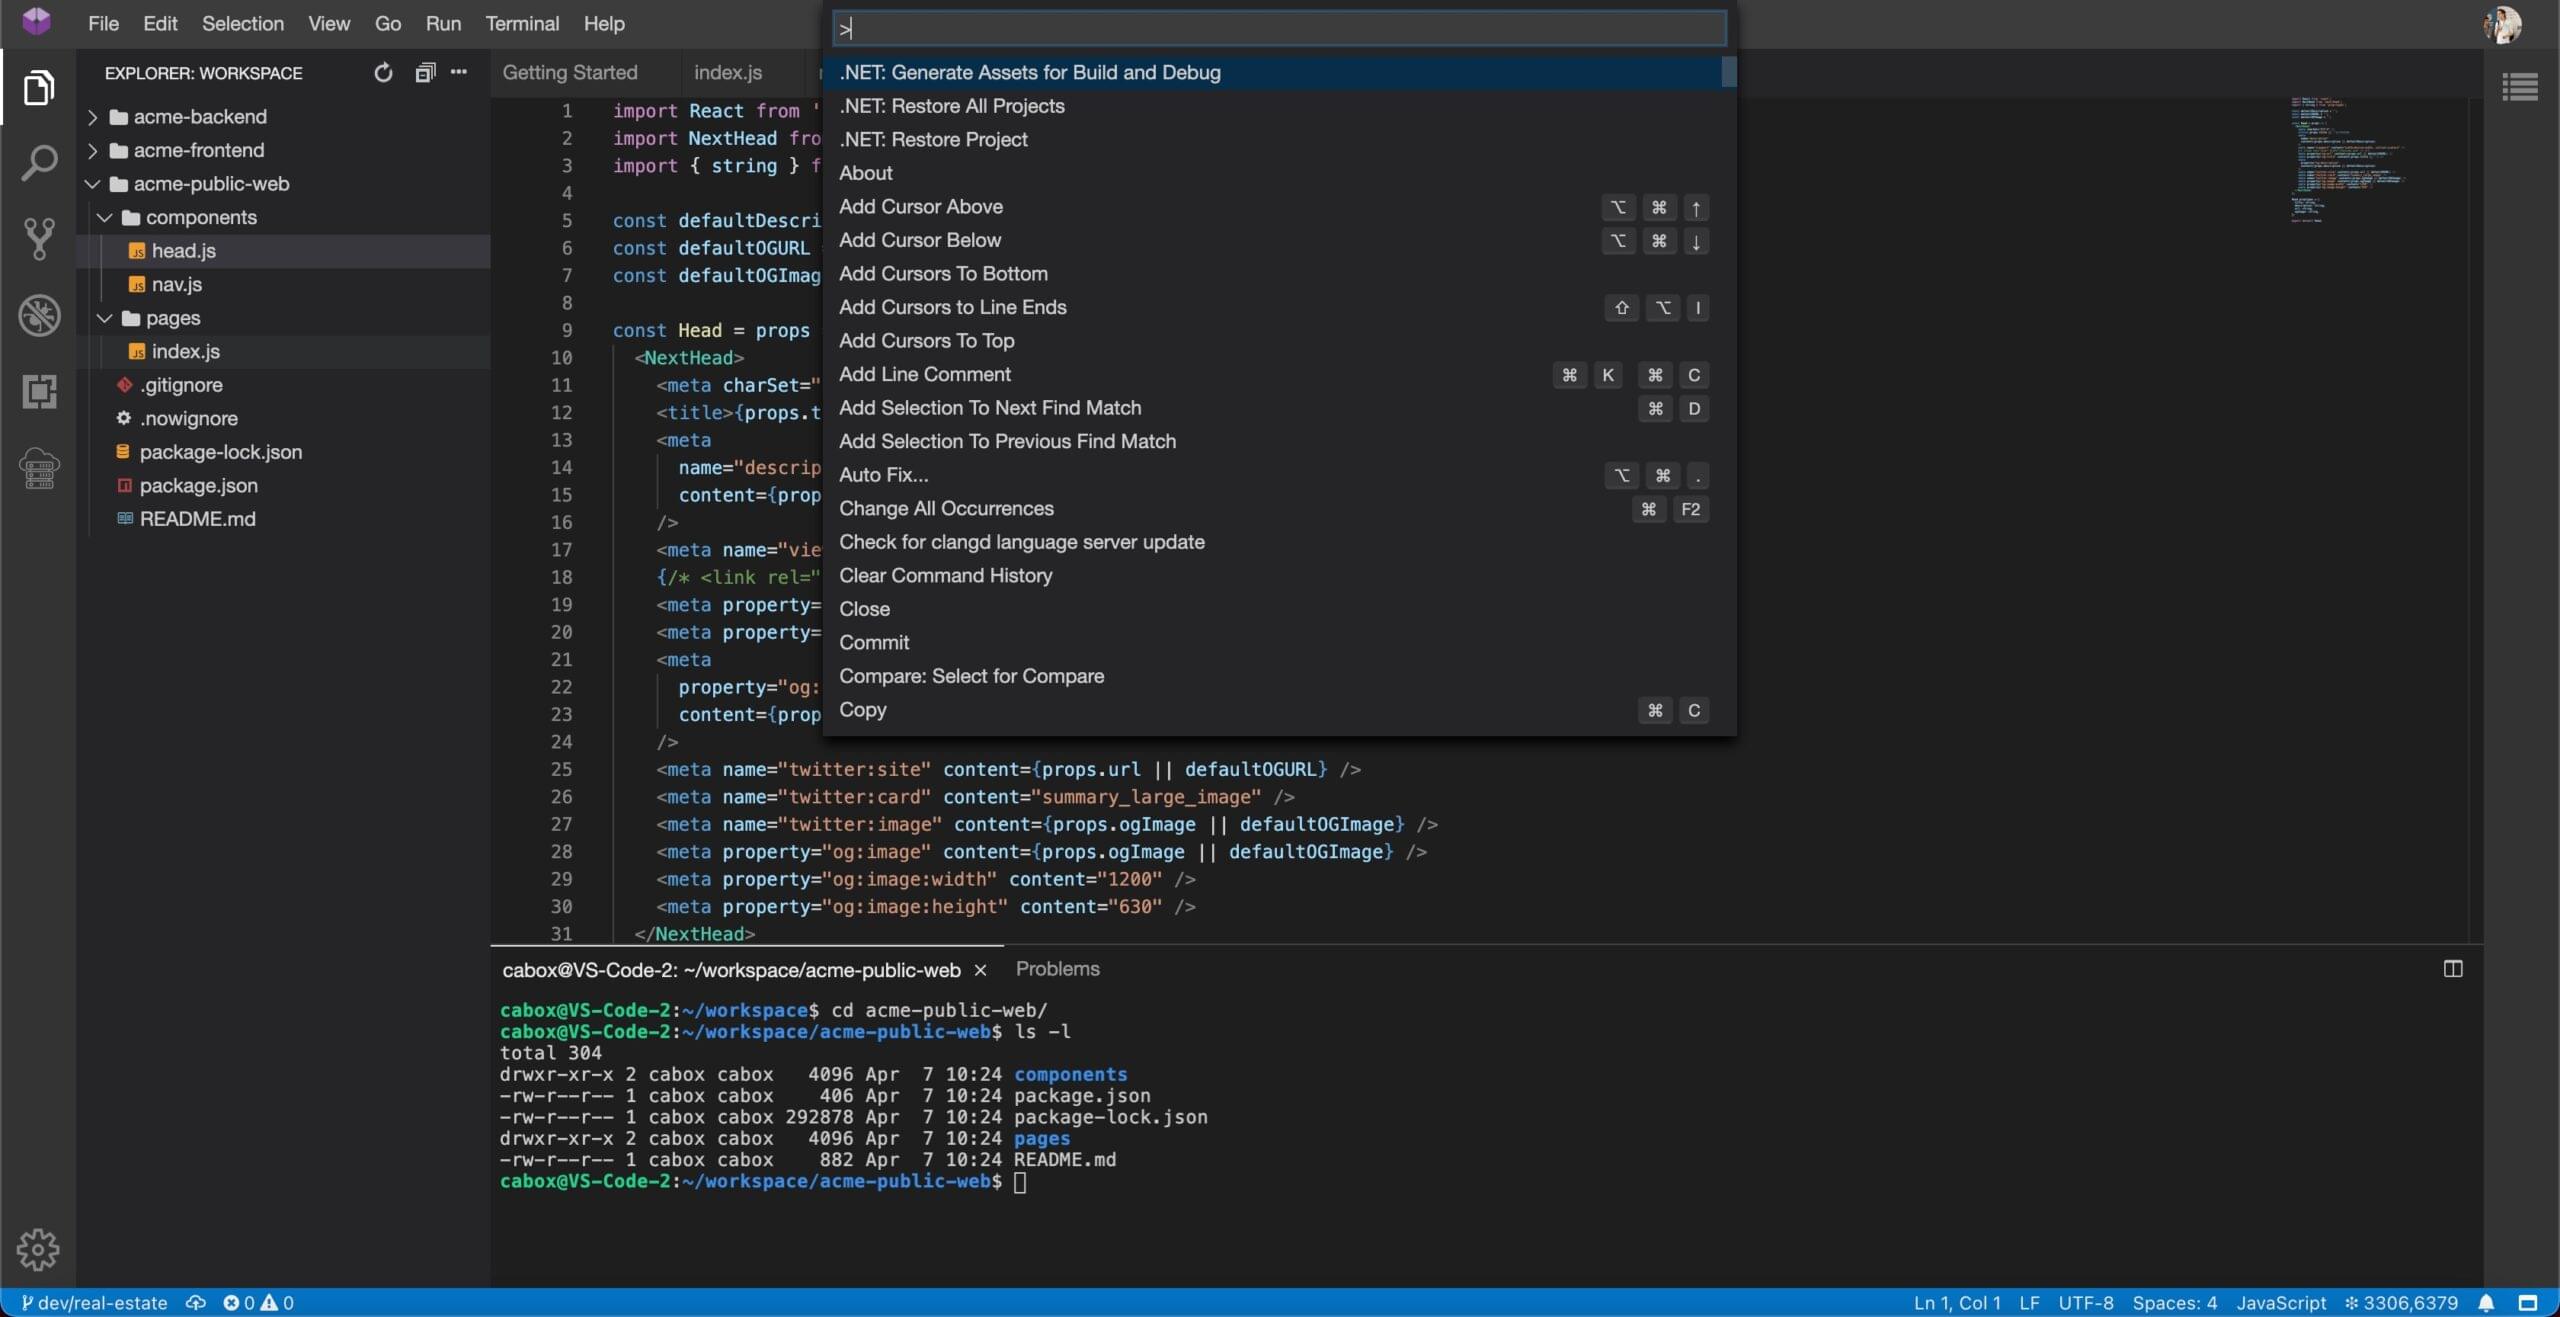 The Cloudanywhere IDE interface